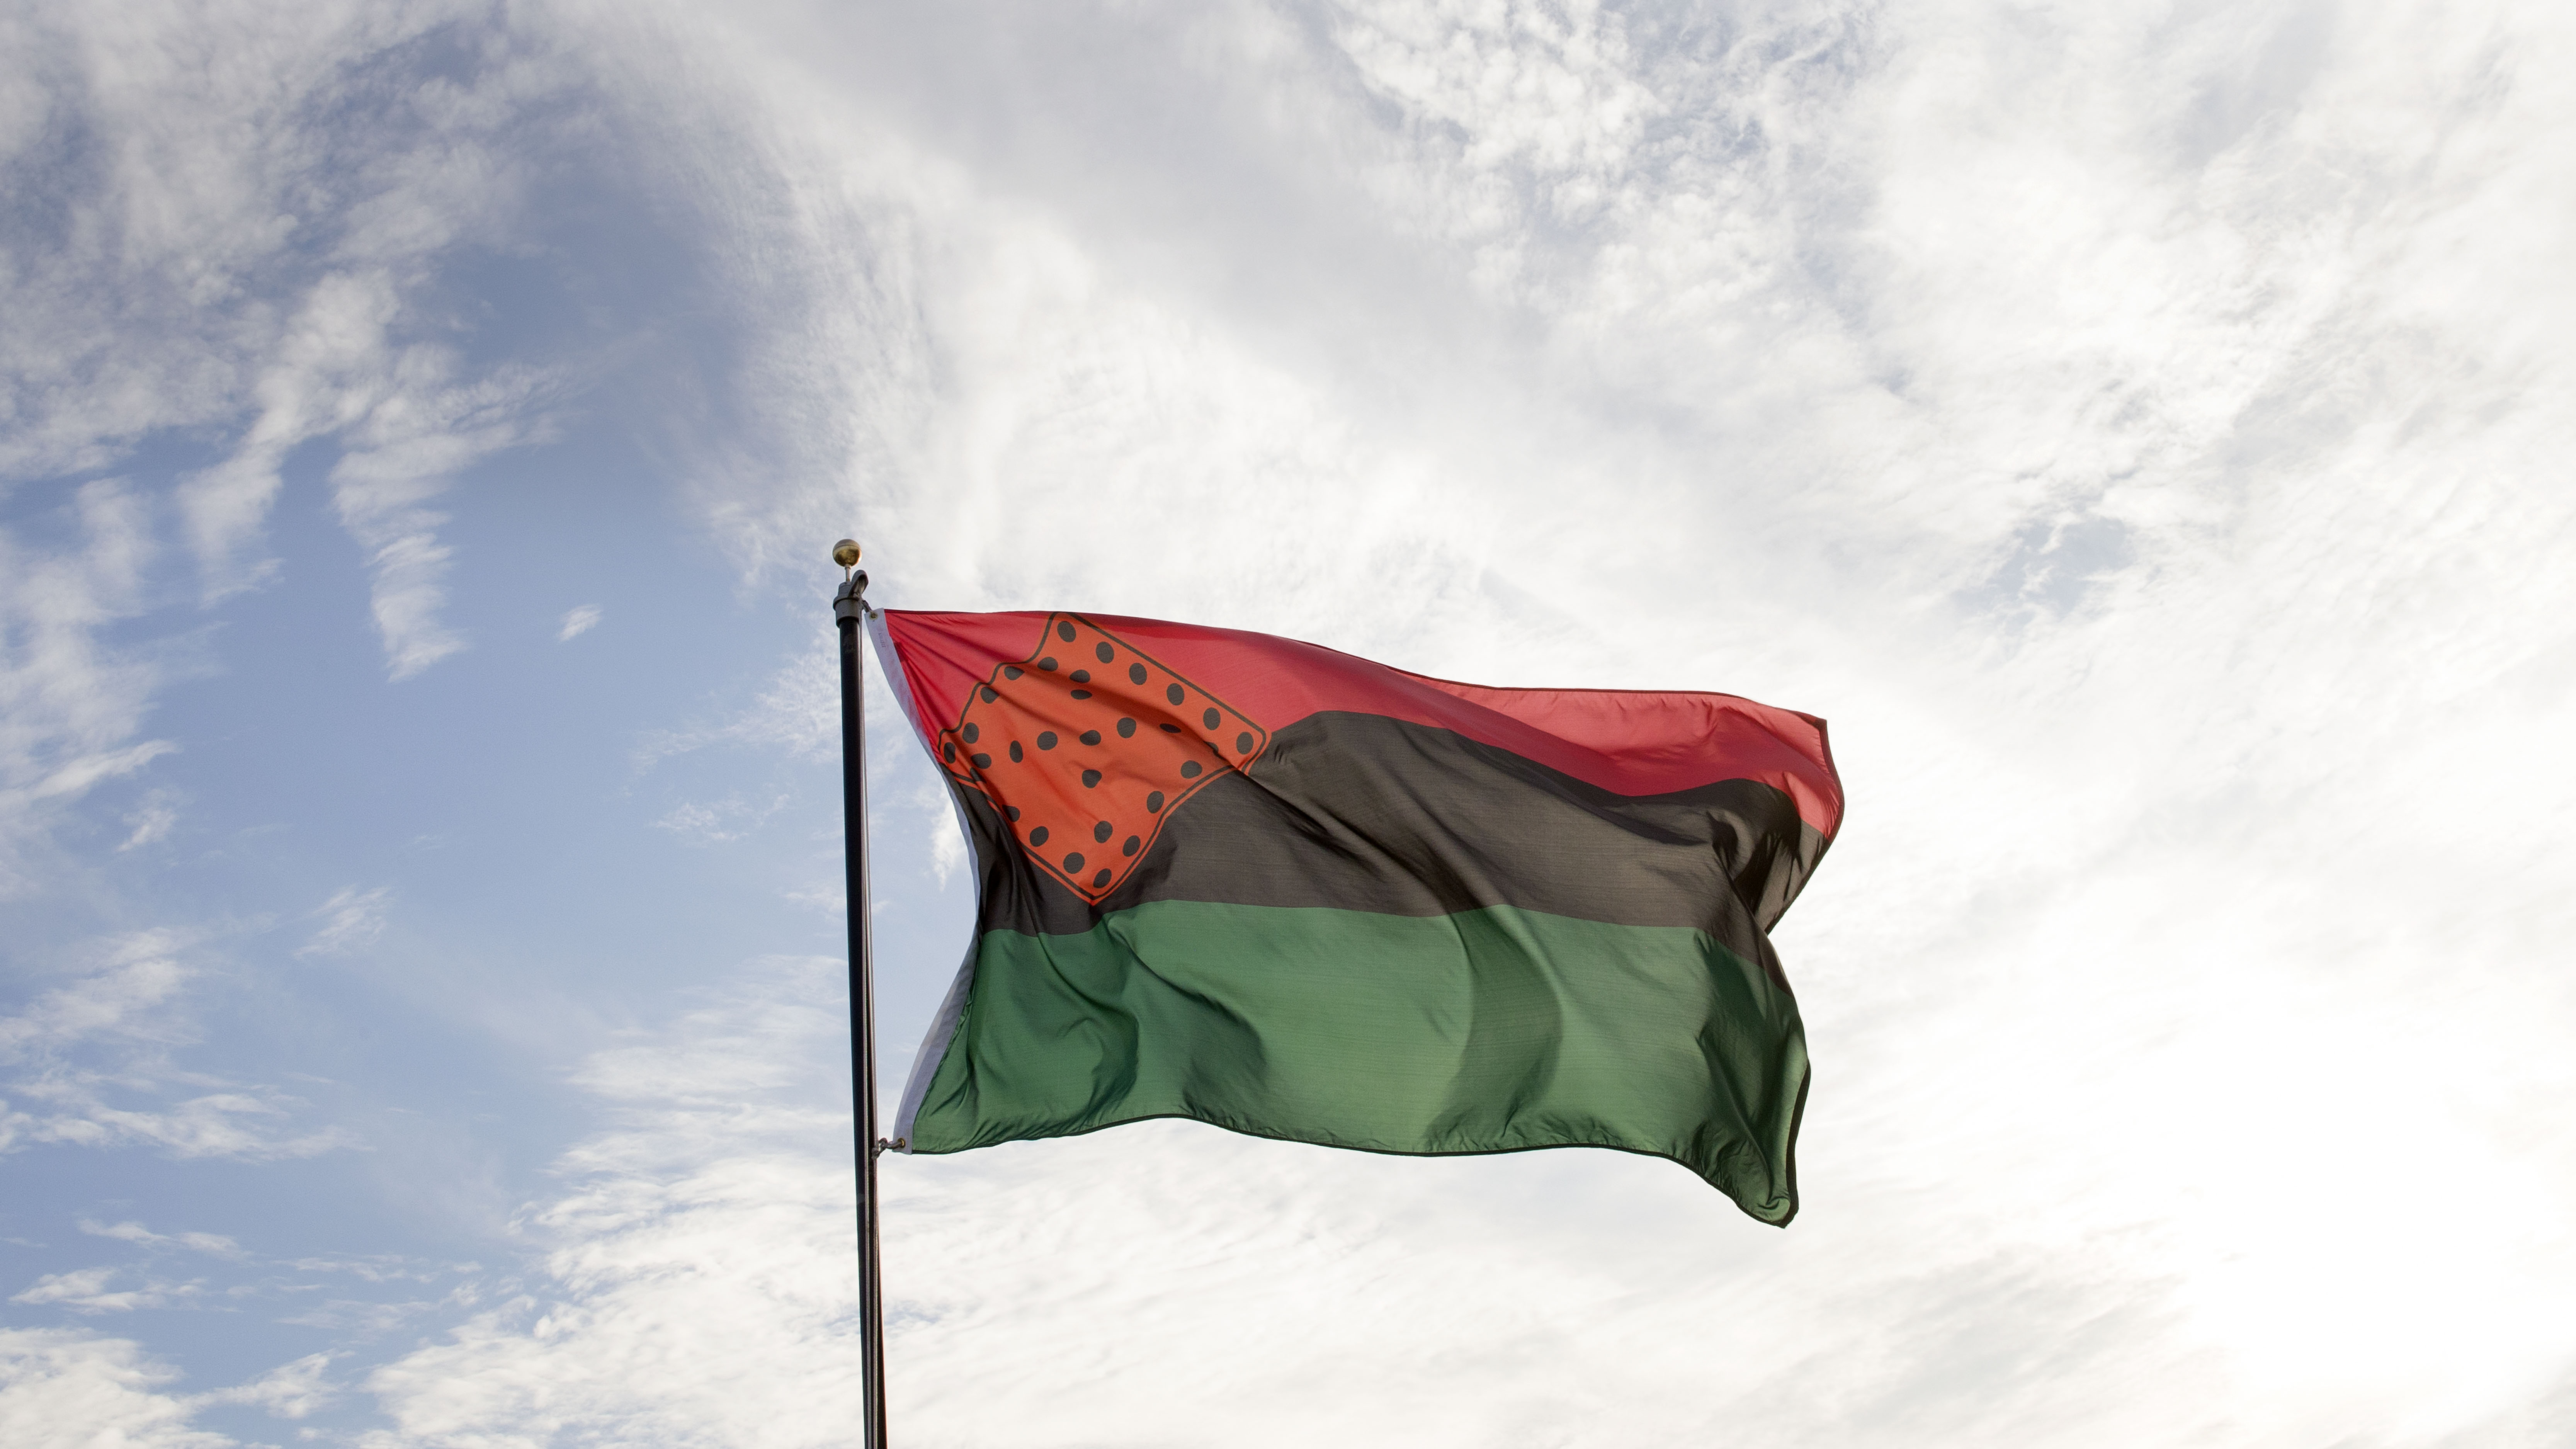 Nari Ward, Breathing Flag, 2017. Nylon flag. A Pan-African flag flies against the sky. It is equally split in red, black, and green colors horizontally. An orange diamond with black dots rests in the upper left corner. 